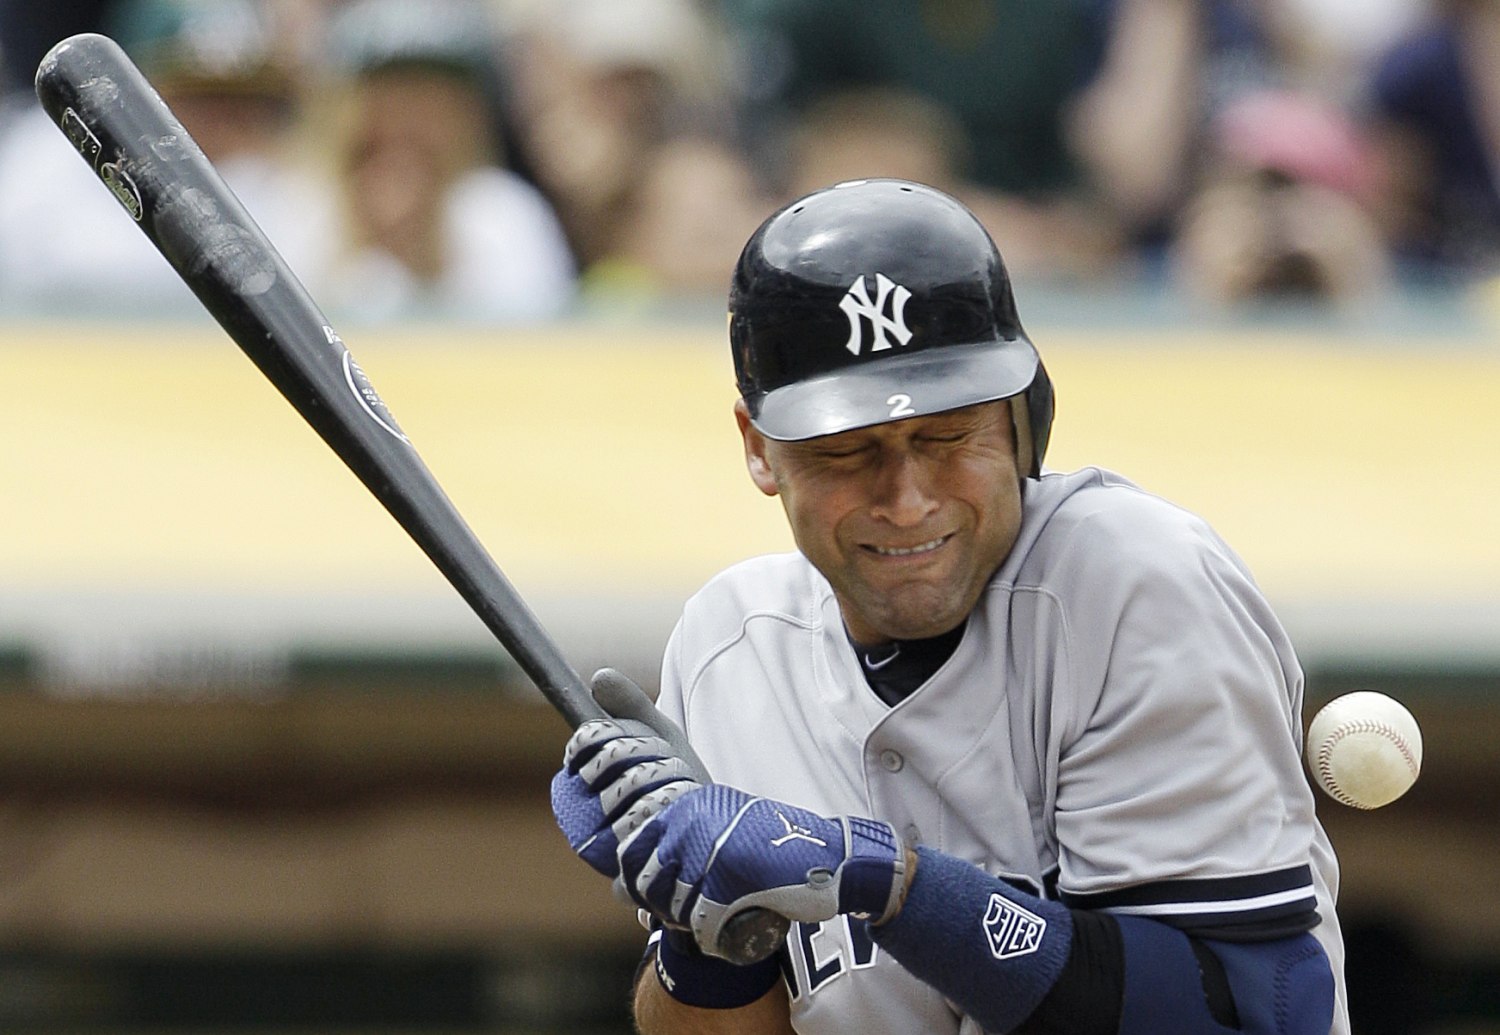 New York Yankees Hall Of Fame Derek Jeter Thank You For The